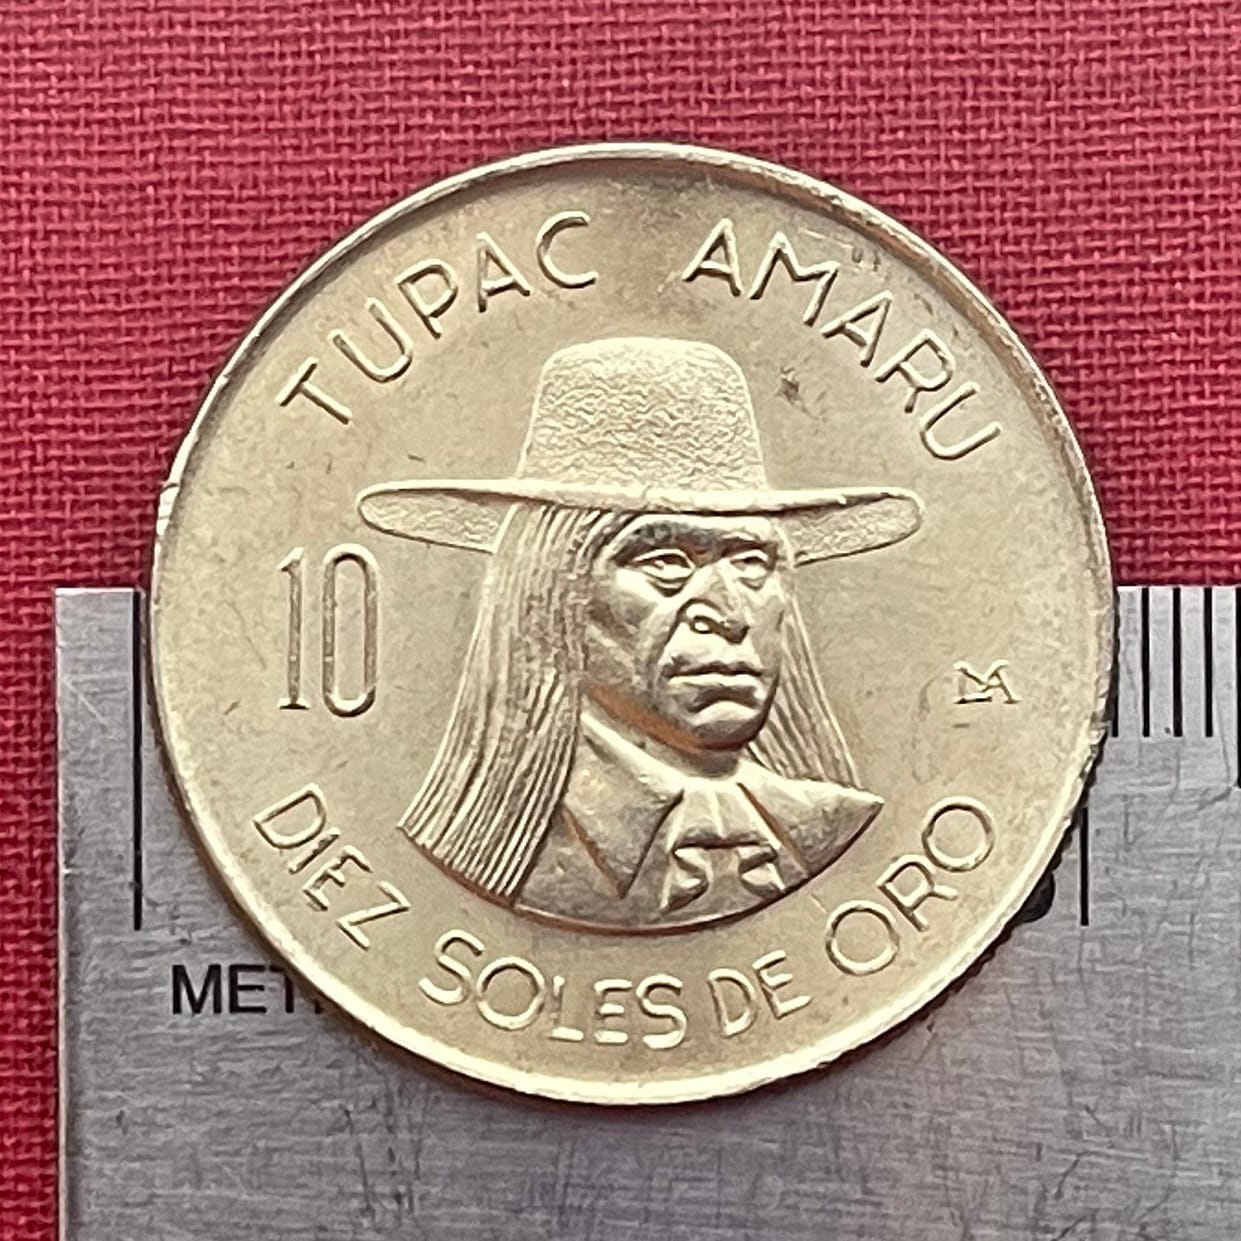 Revolutionary Tupac Amaru II 10 Soles (LARGE) Peru Authentic Coin Money for Jewelry and Craft Making (Indigenous Leader) (31 mm)